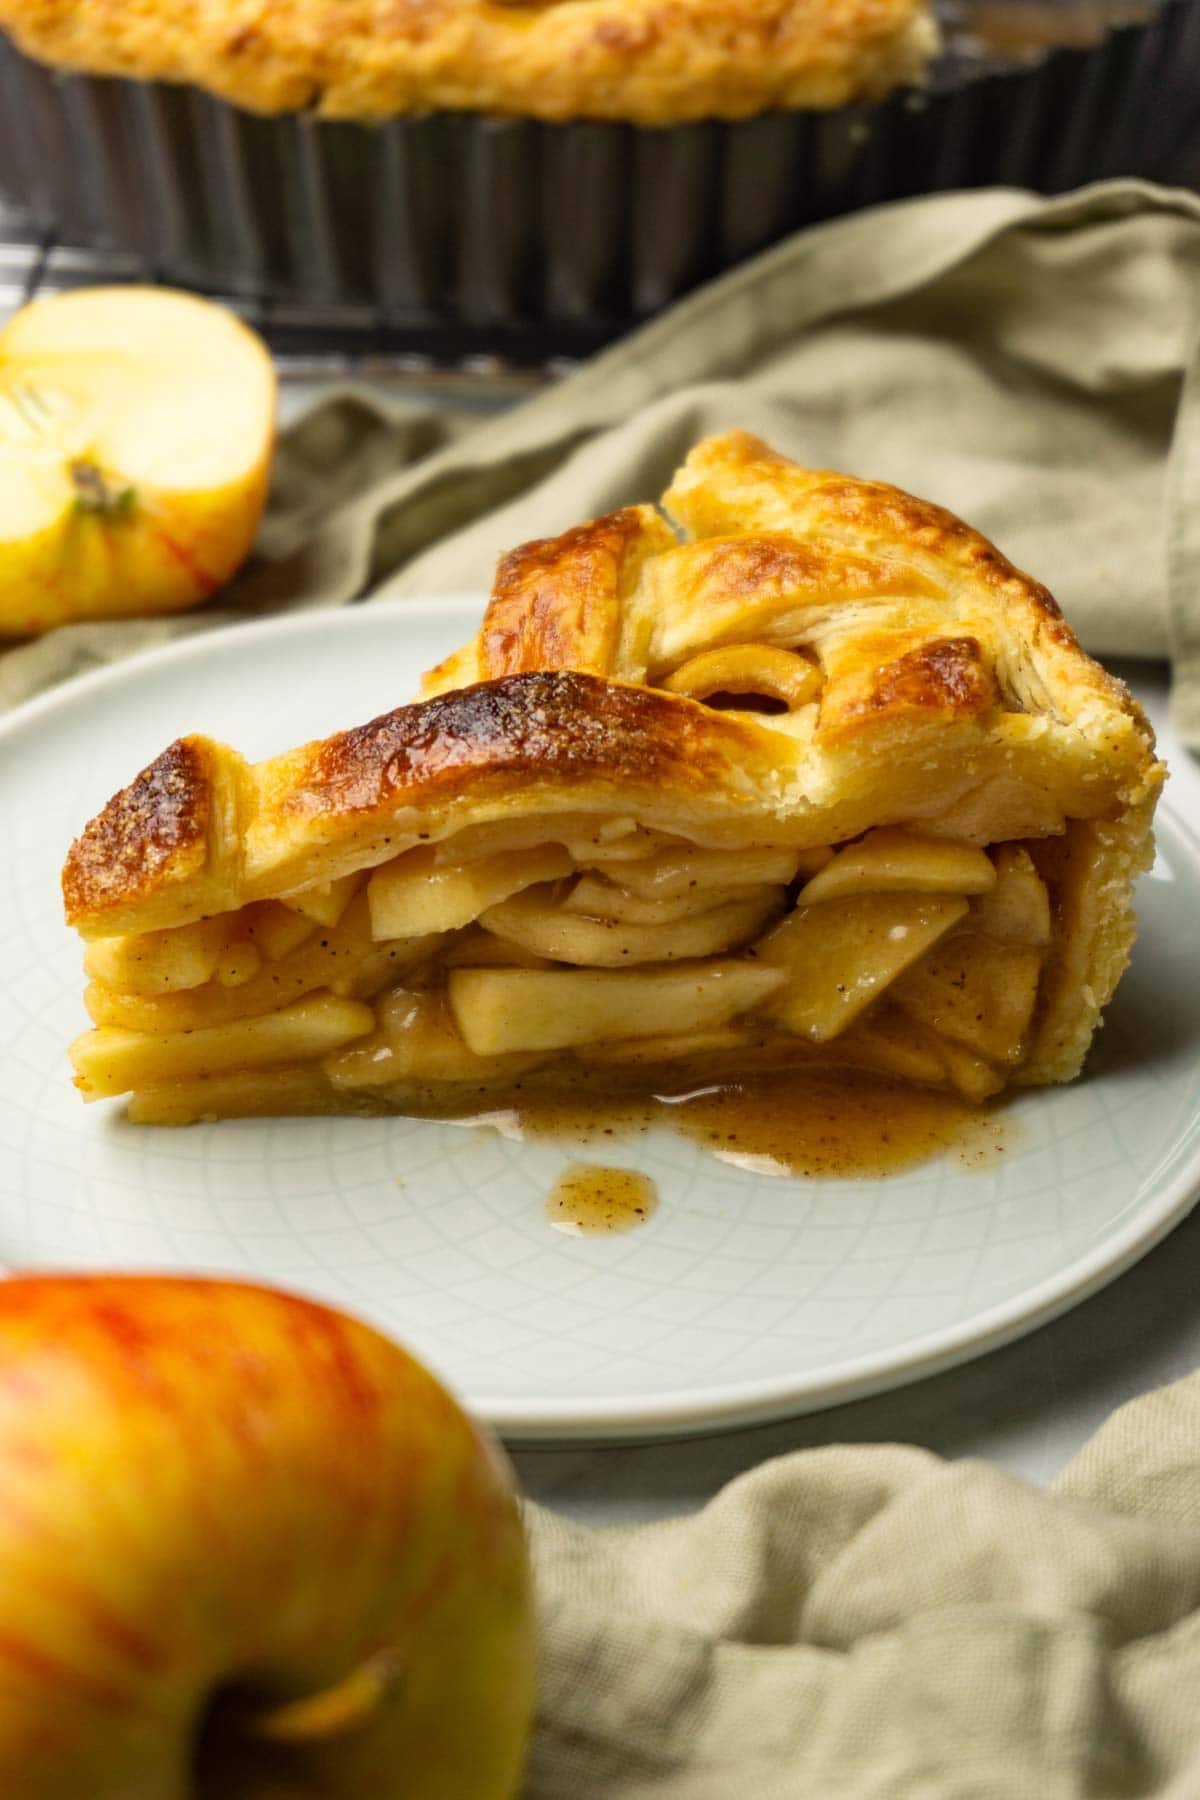 A piece of apple pie served on a small round plate, fresh apples are lying around.